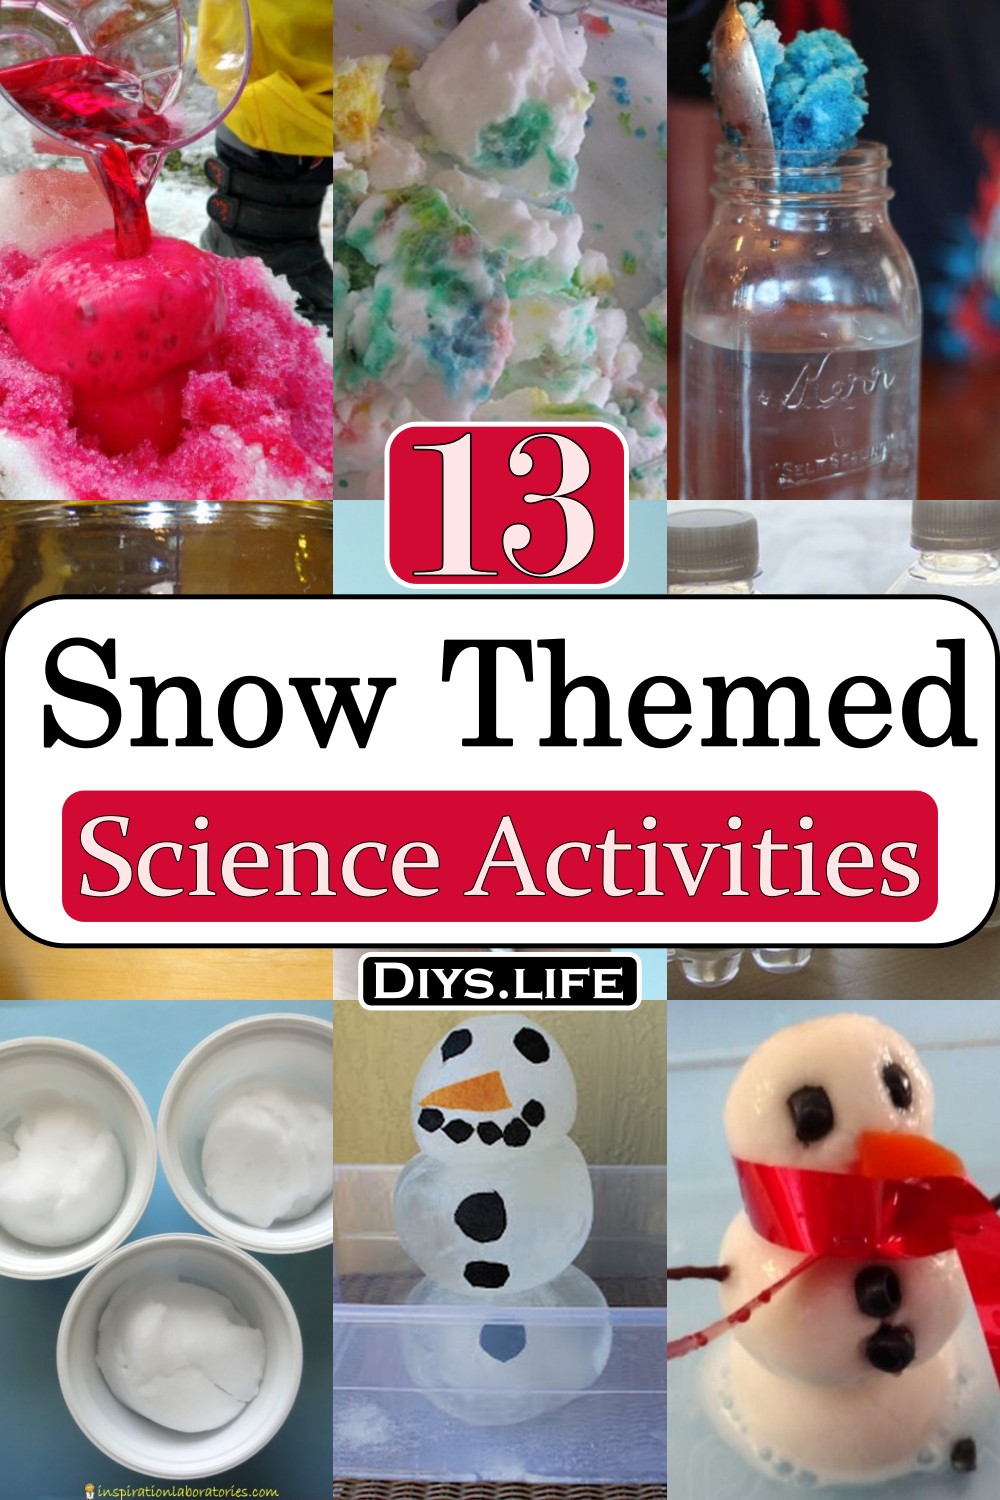 Snow Themed Science Activities